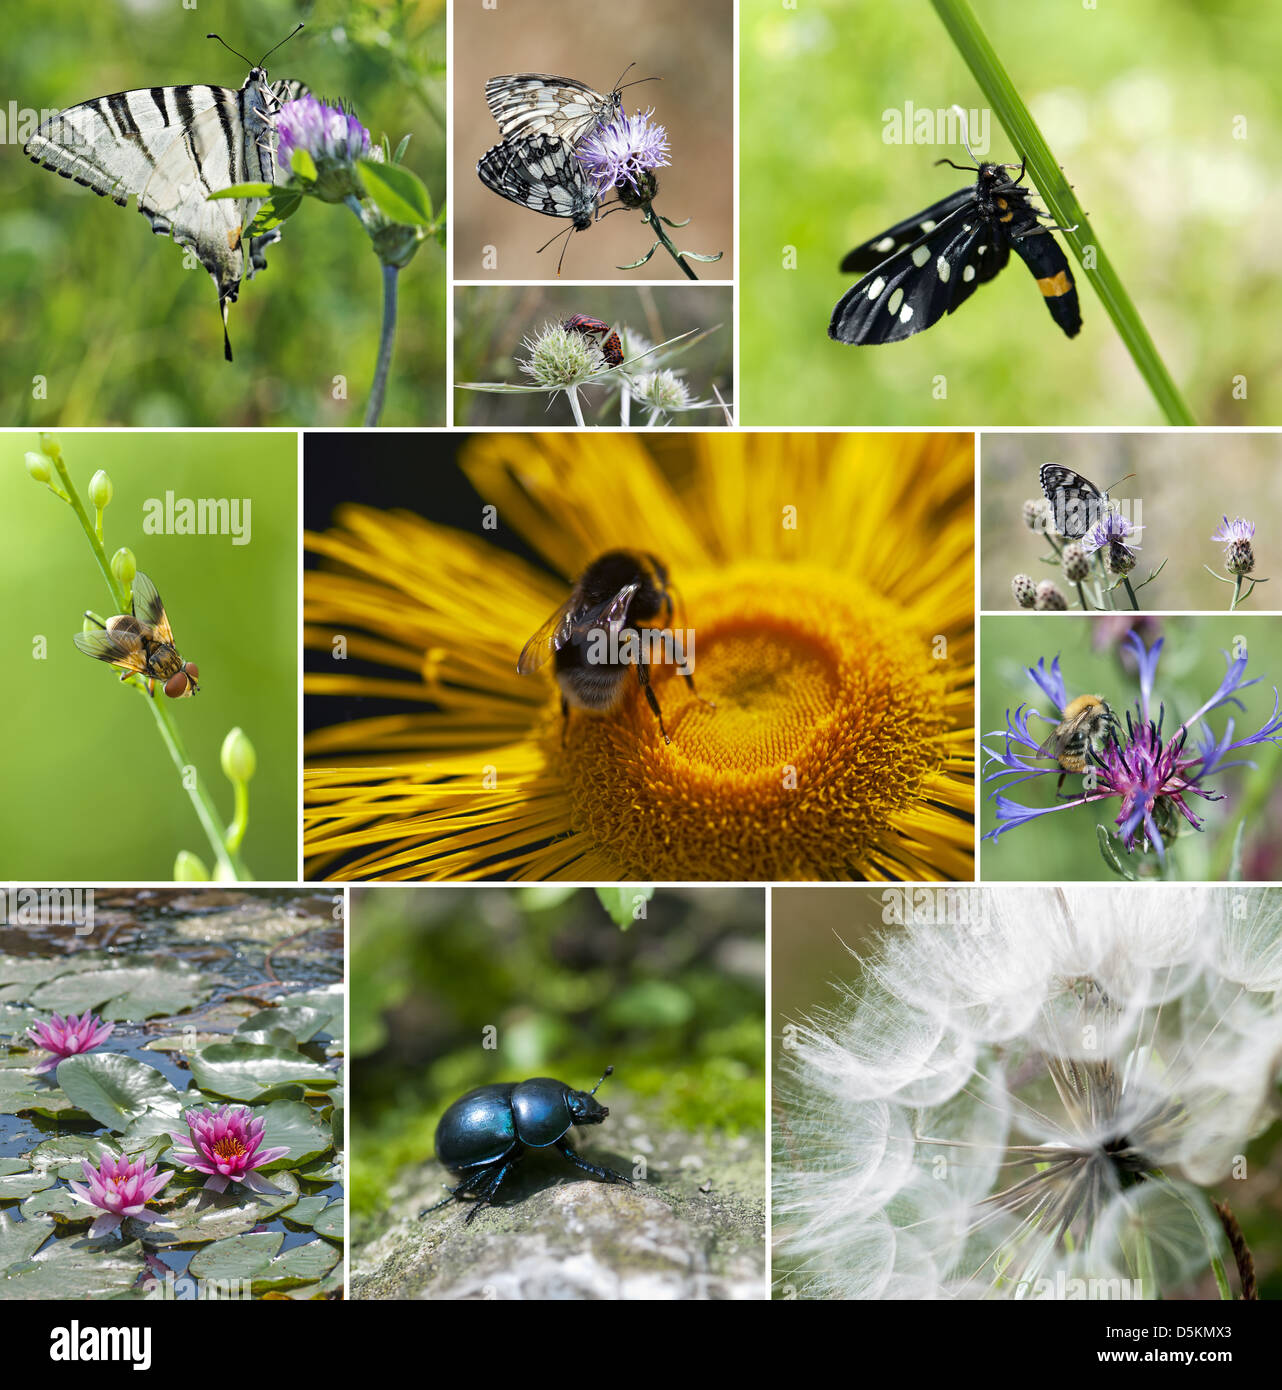 Collage of insect and flowers. Stock Photo